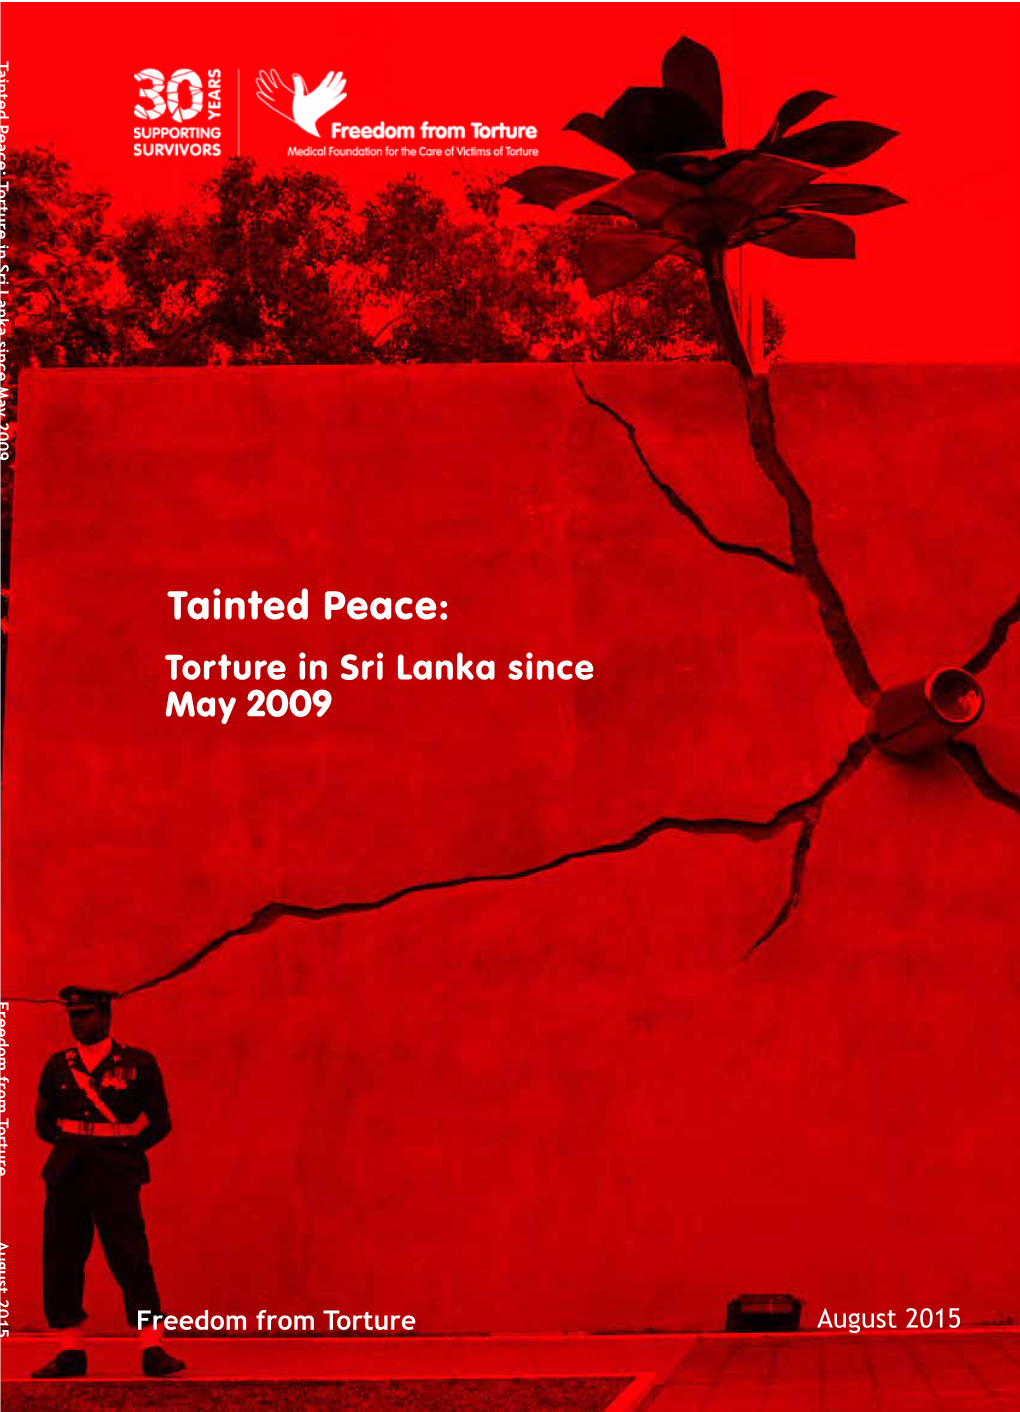 Tainted Peace: Torture in Sri Lanka Since May 2009